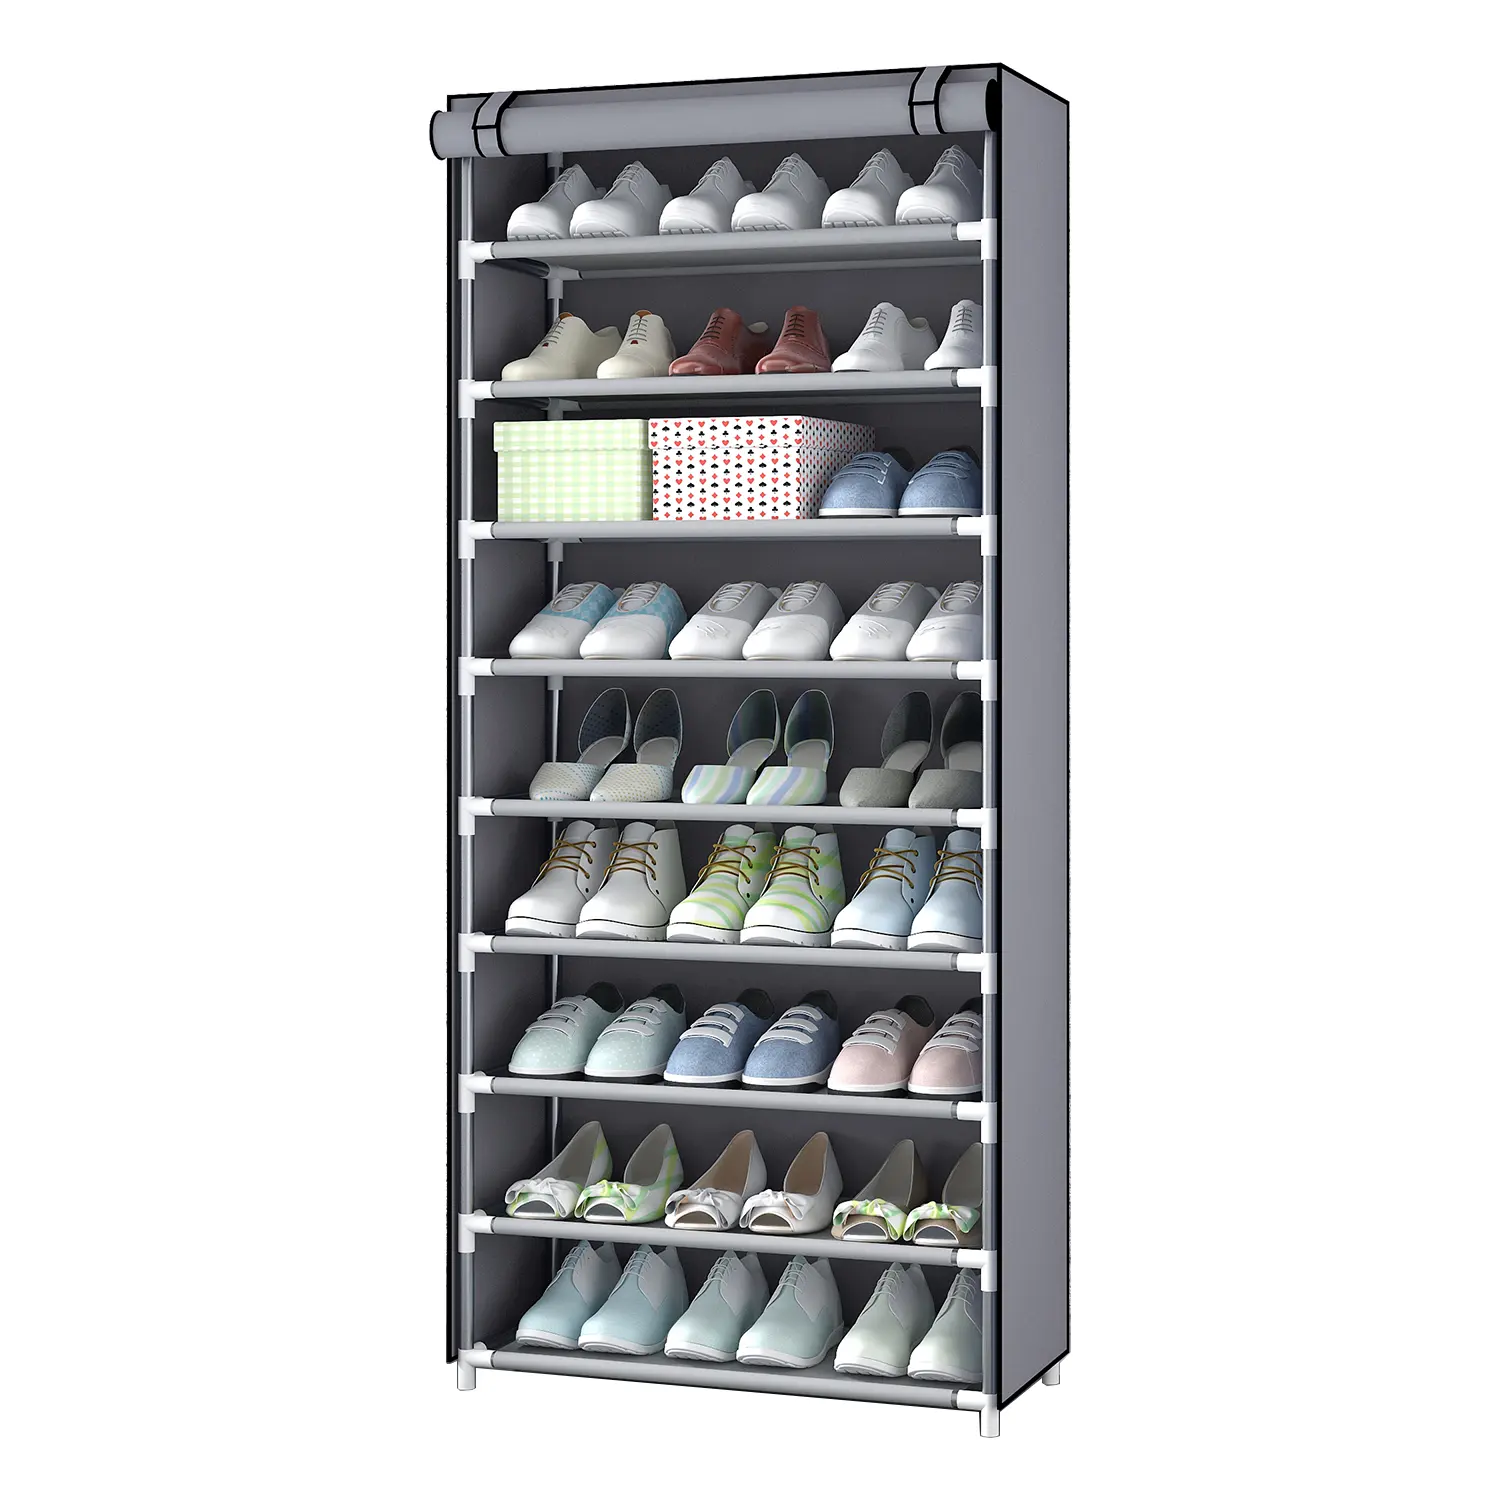 Portabl Shoe Rack Fabric Shoe Rack With Cover Fabric Portable Cabinet Stainless Steel Shoe Rack Storage For Home Foldable Organize